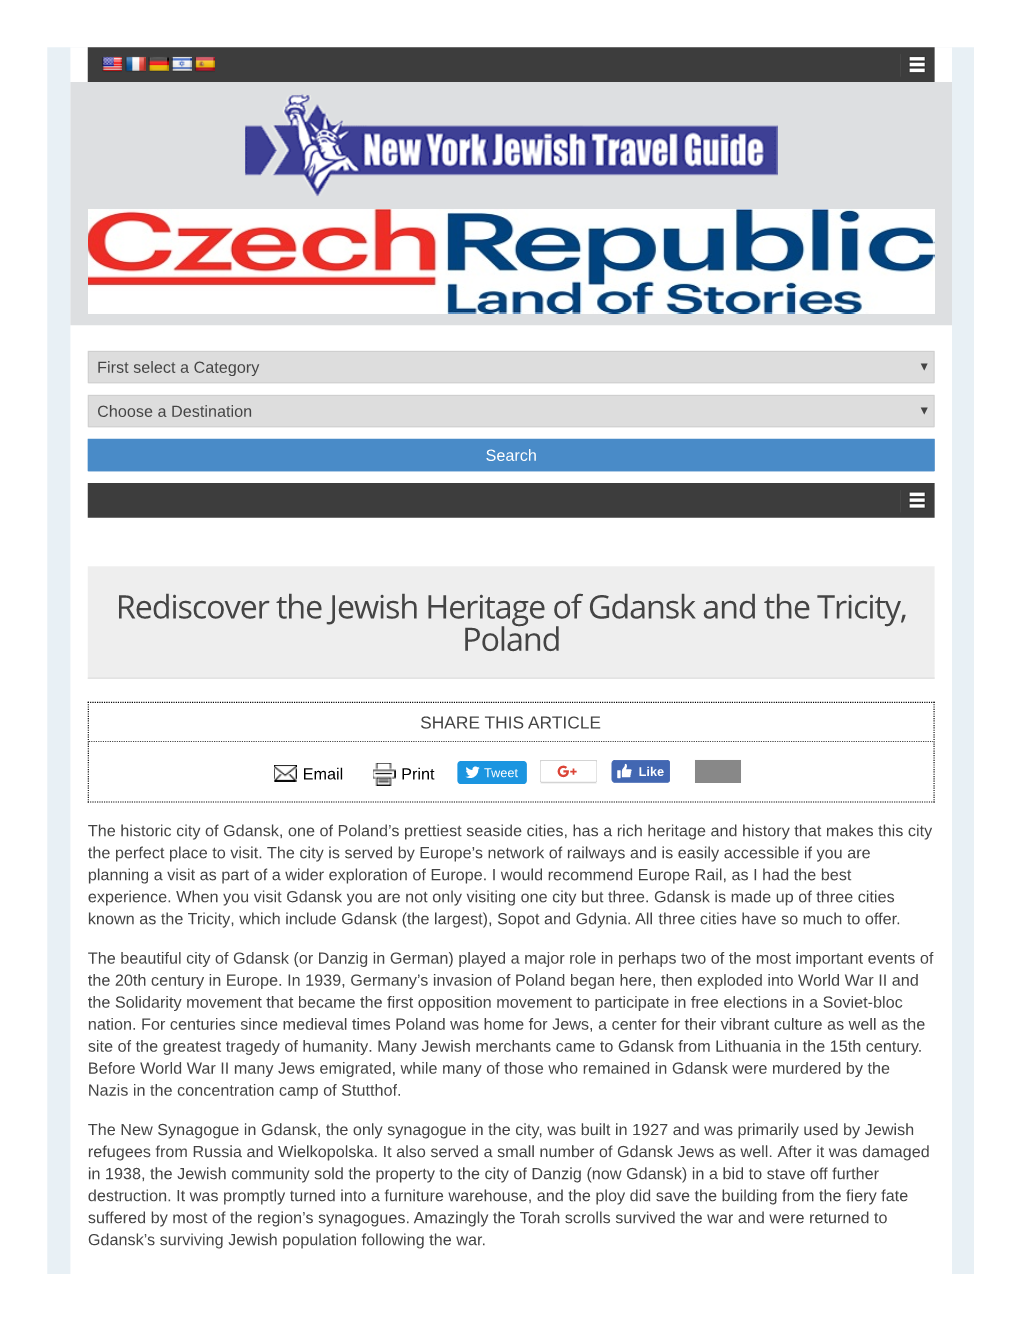 Rediscover the Jewish Heritage of Gdansk and the Tricity, Poland